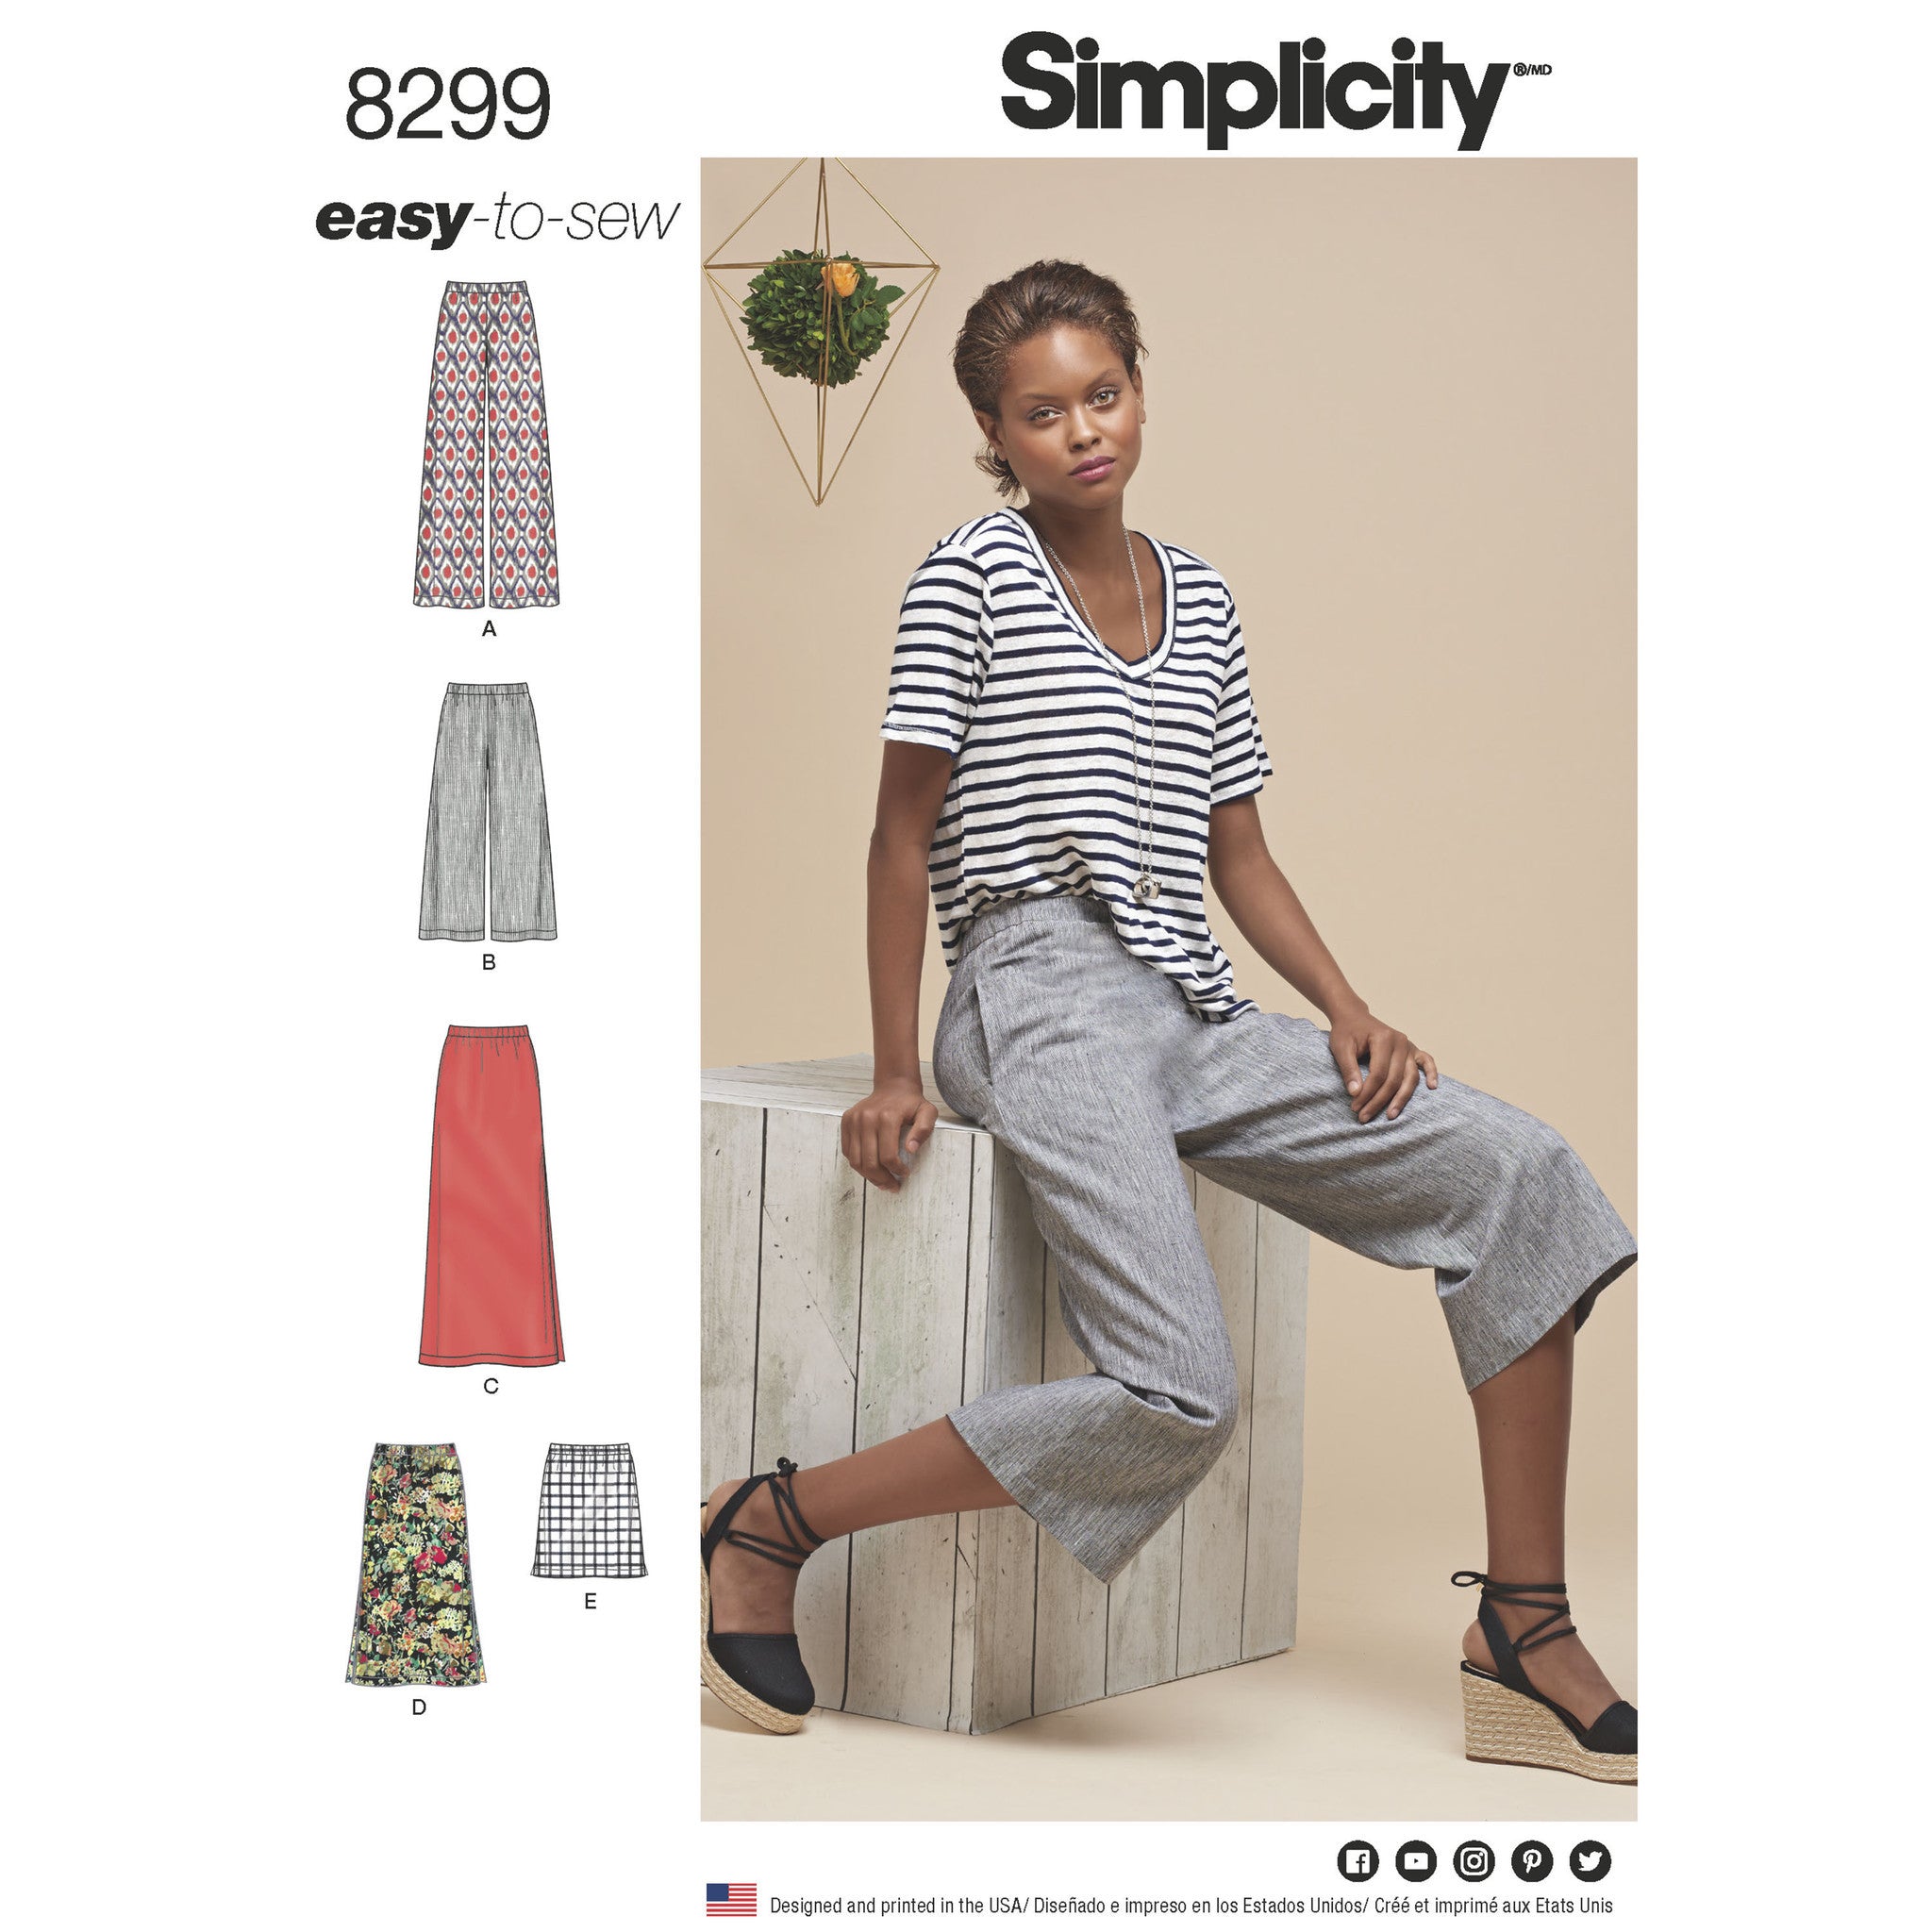 Simplicity Pattern 8299 misses skirts or trousers from Jaycotts Sewing Supplies